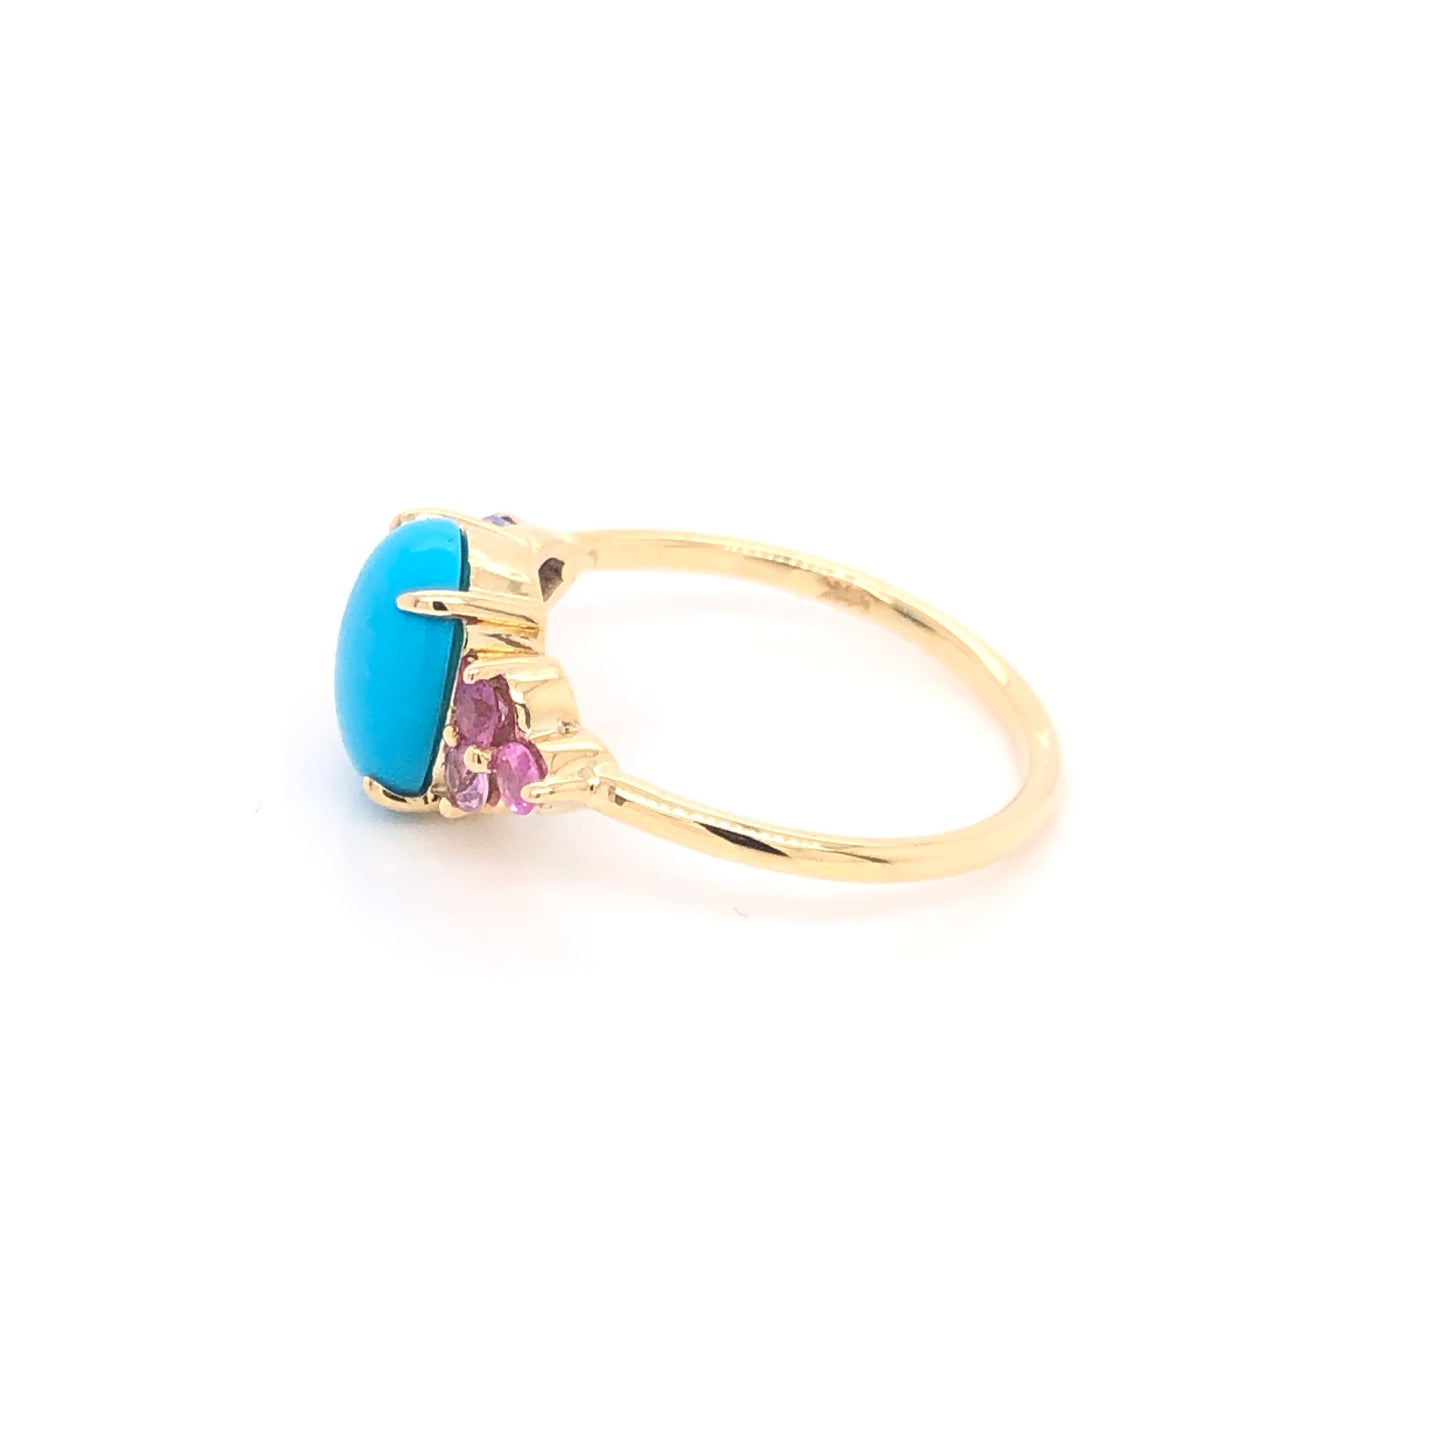 Turquoise Ring with Tanzanite and Pink Sapphire